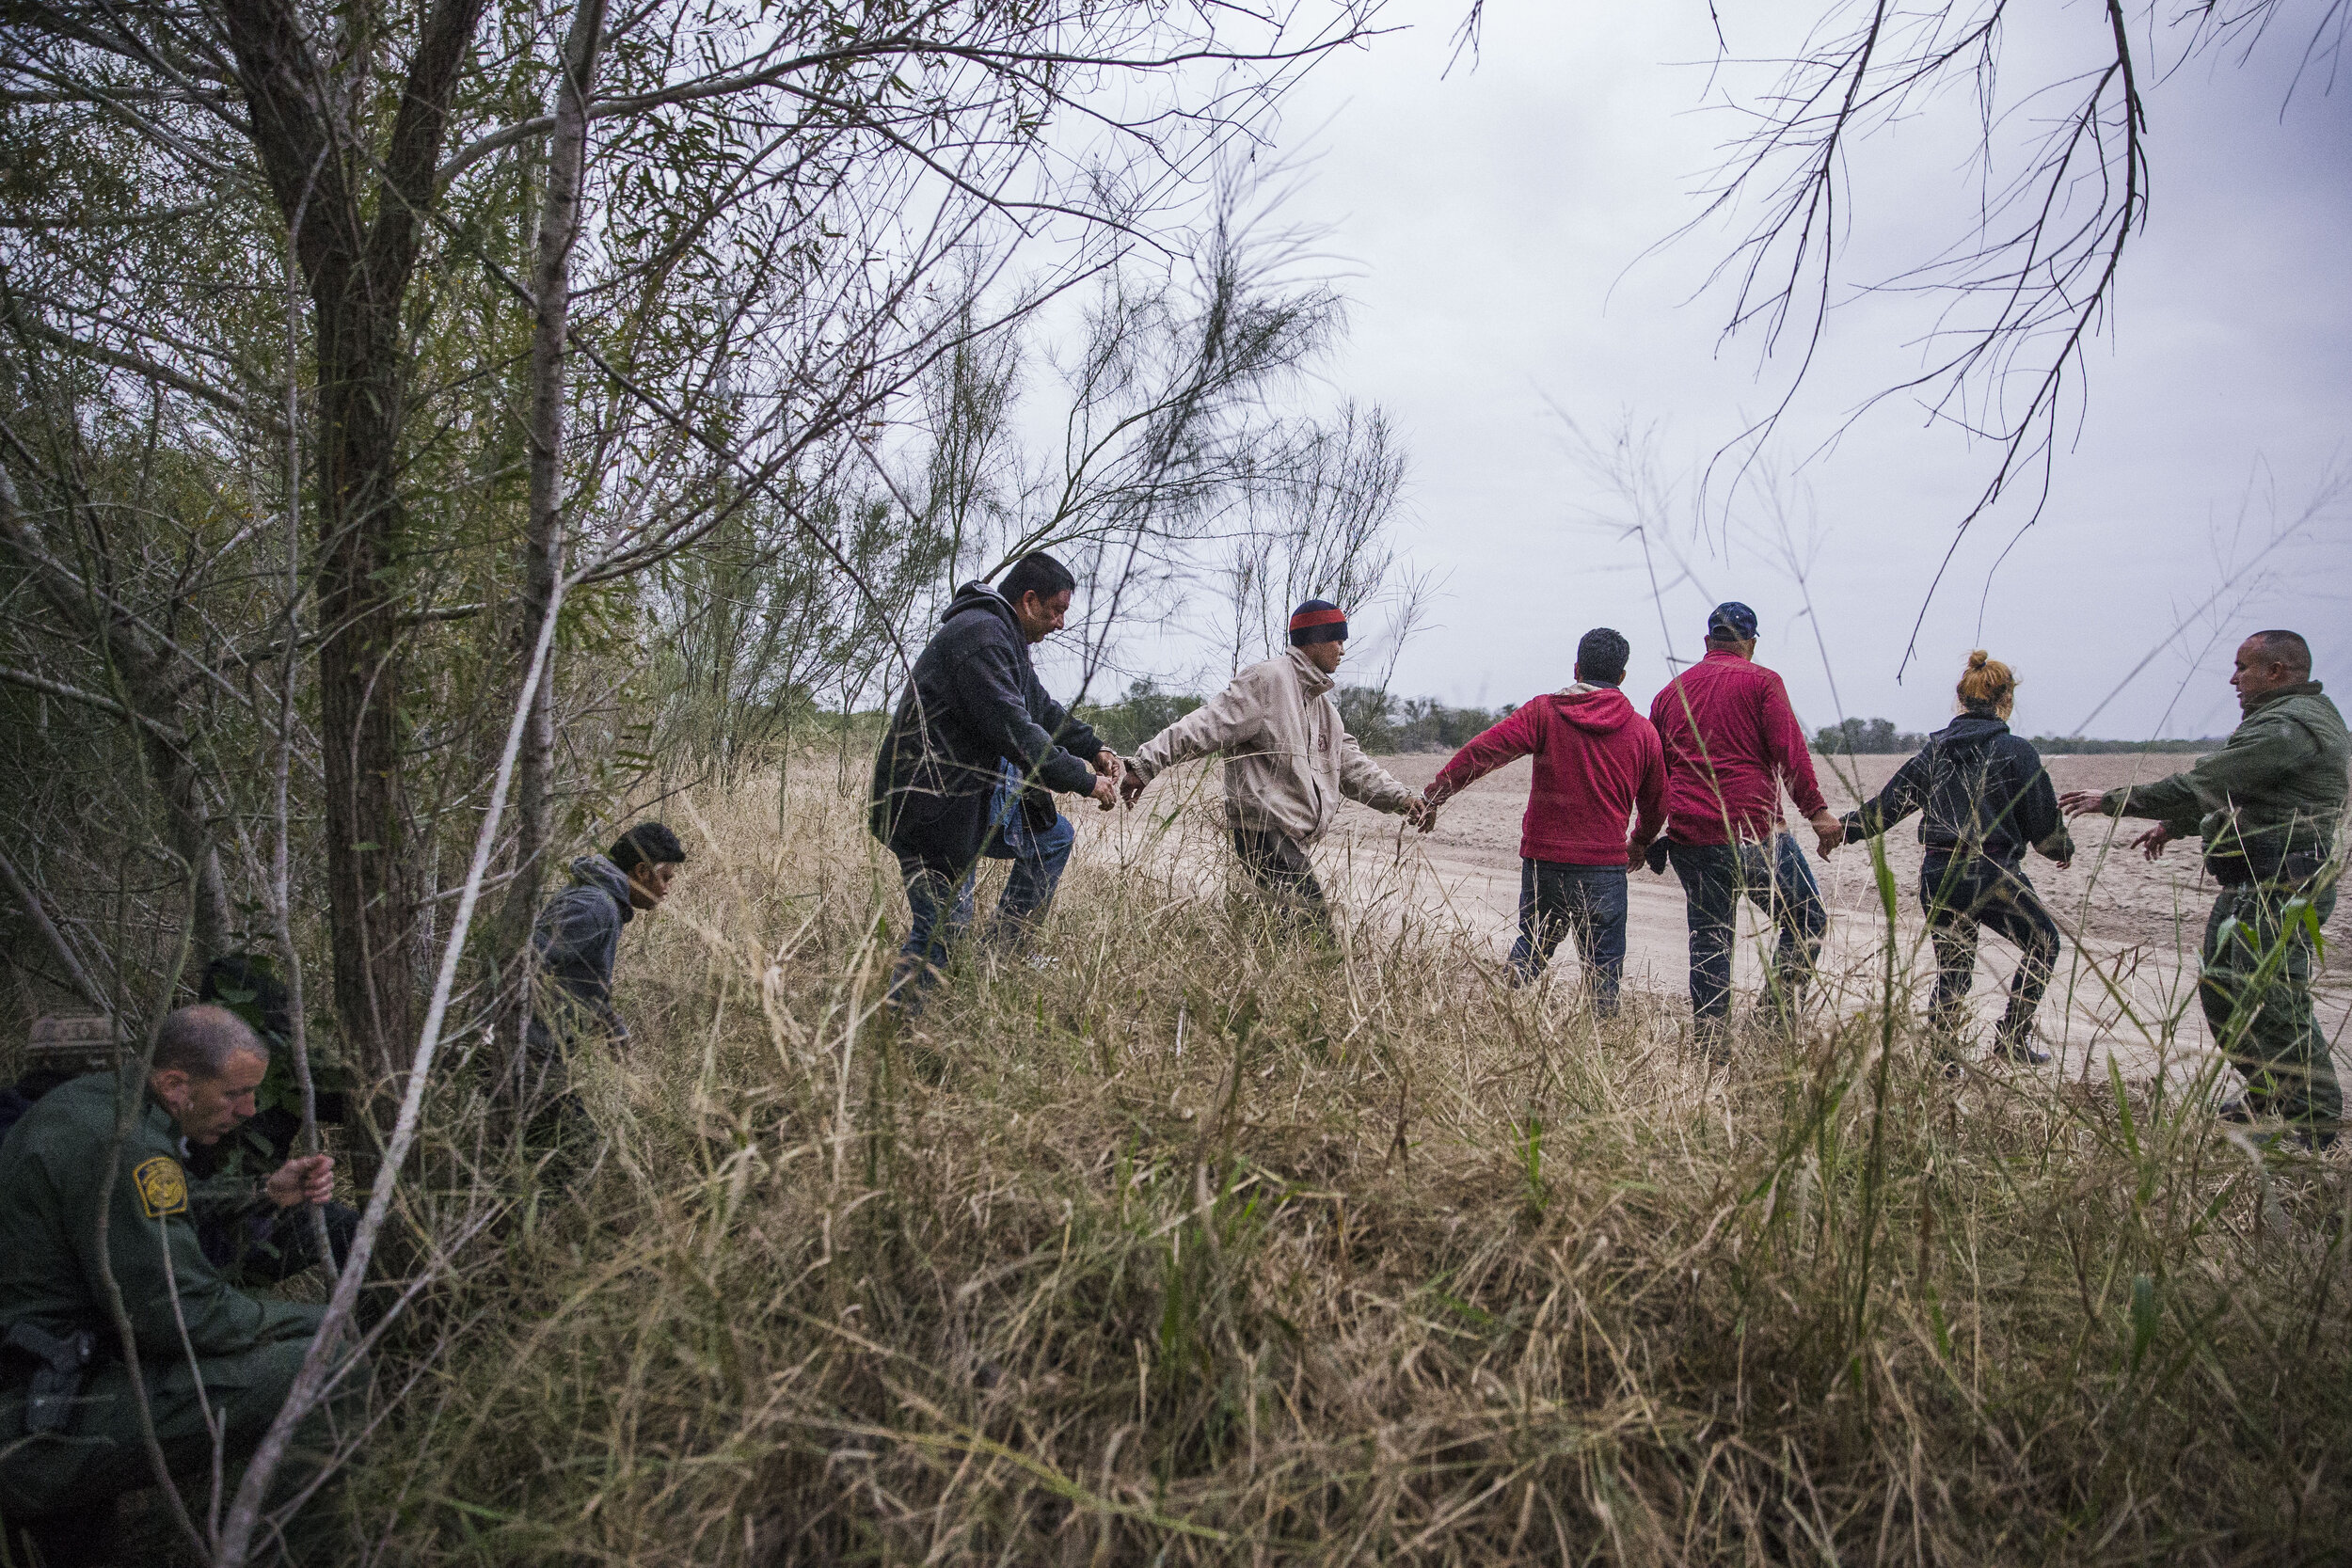  Border Patrol Agents lead a group of immigrants out of the brush after they were apprehended crossing the border from Mexico into the U.S. on Wednesday, Dec. 5, 2018, near McAllen, TX.   [Amanda Voisard/AMERICAN-STATESMAN]  